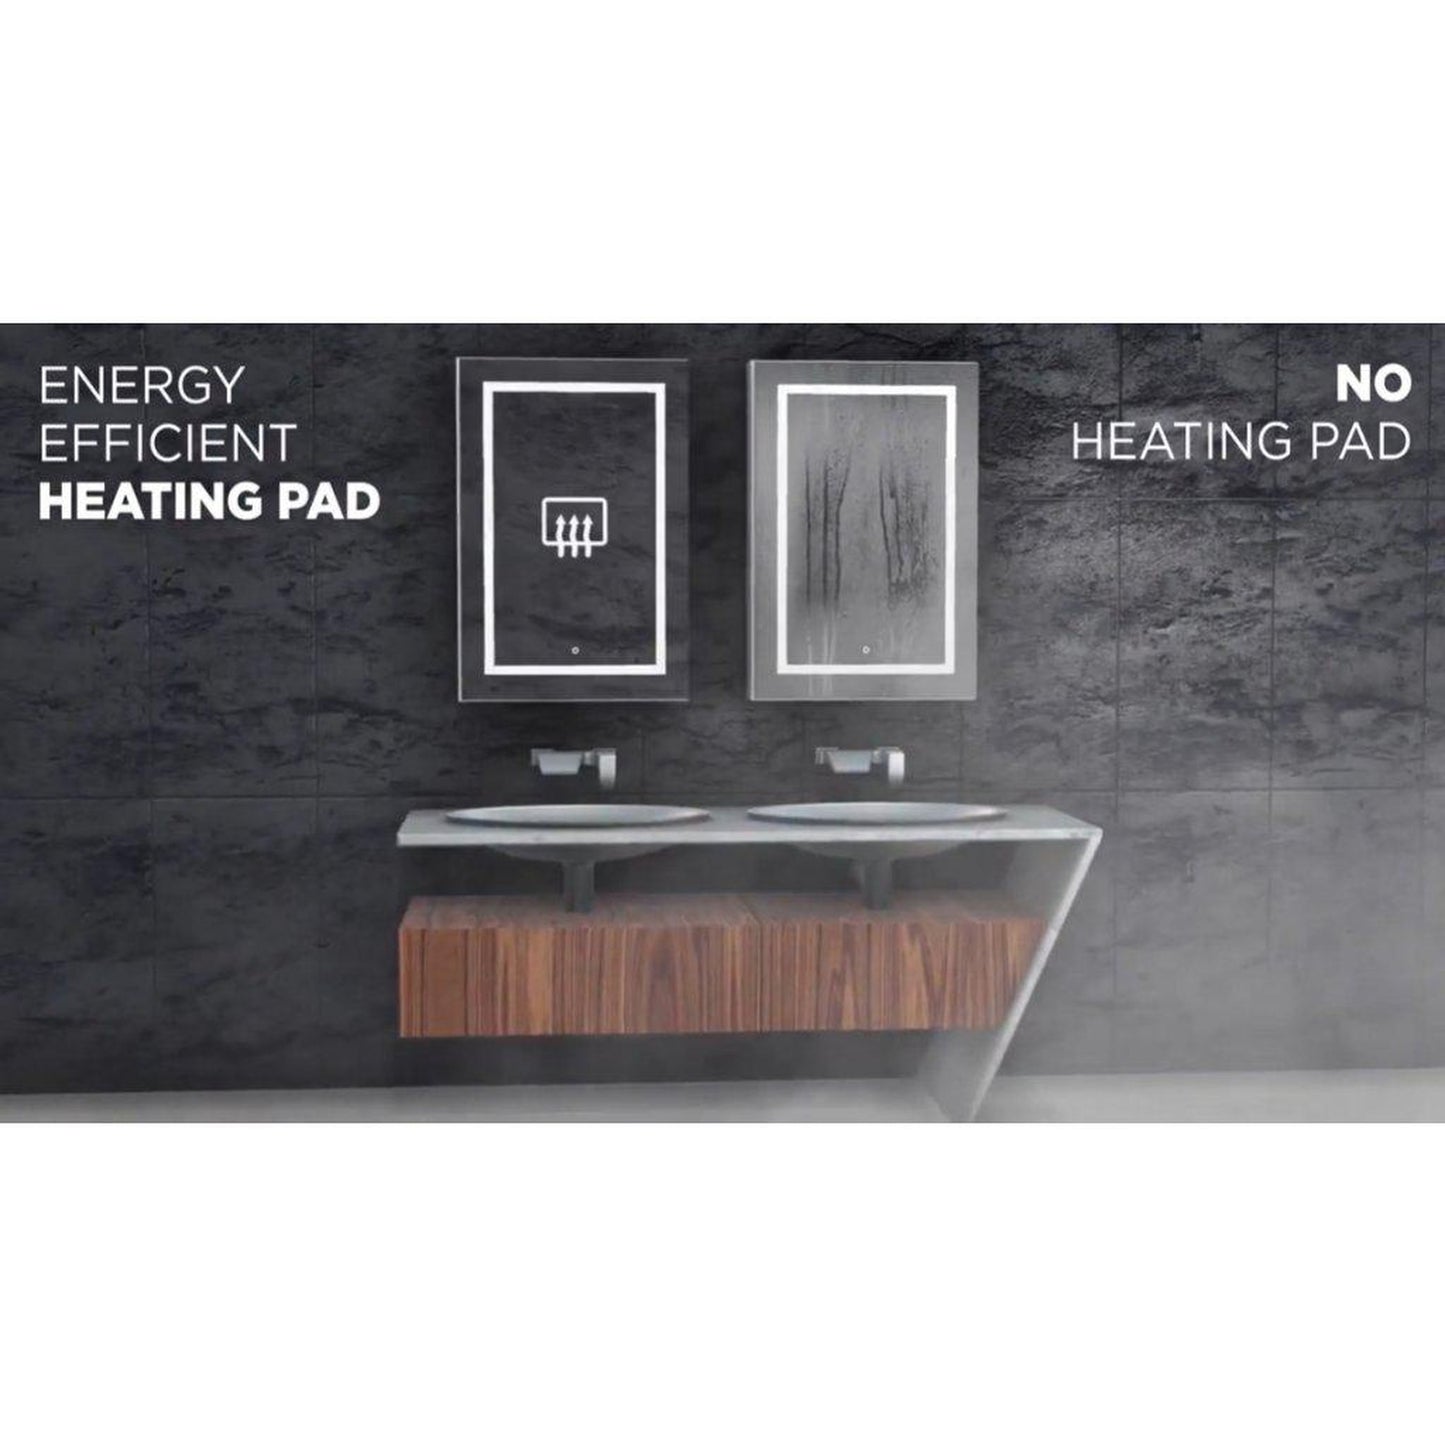 Krugg Reflections Mod 36" x 36" 18D 5000K Rectangular Modular Corner Wall-Mounted Silver-Backed LED Bathroom Vanity Mirror With Built-in Defogger and Dimmer